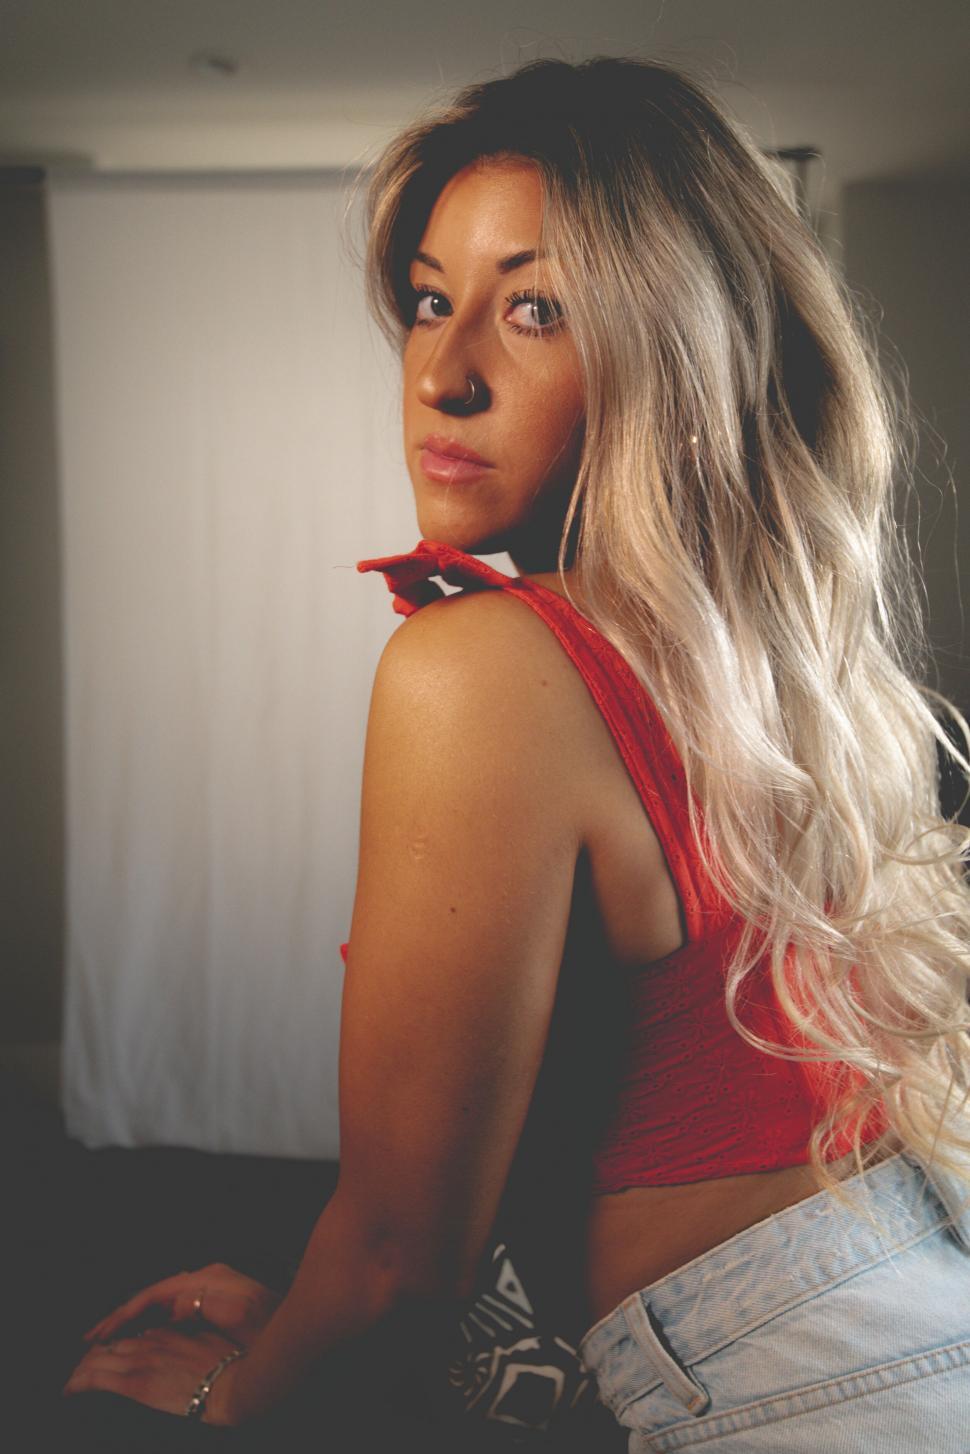 Free Image of Softly lit woman in a red top portrait 